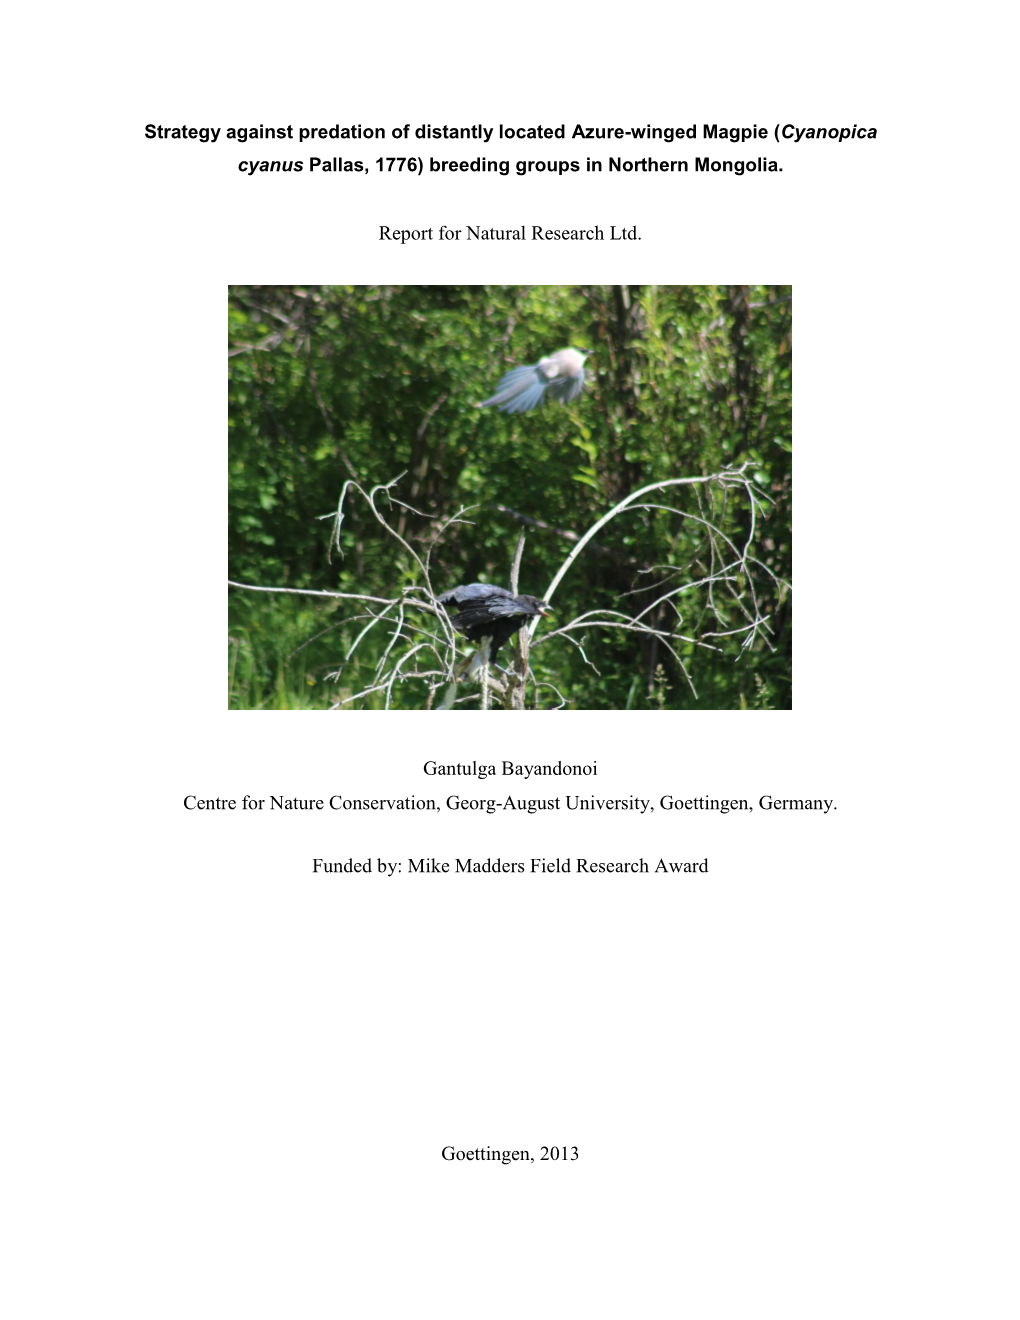 Cooperative Breeding in the Azure-Winged Magpie in Northern Mongolia